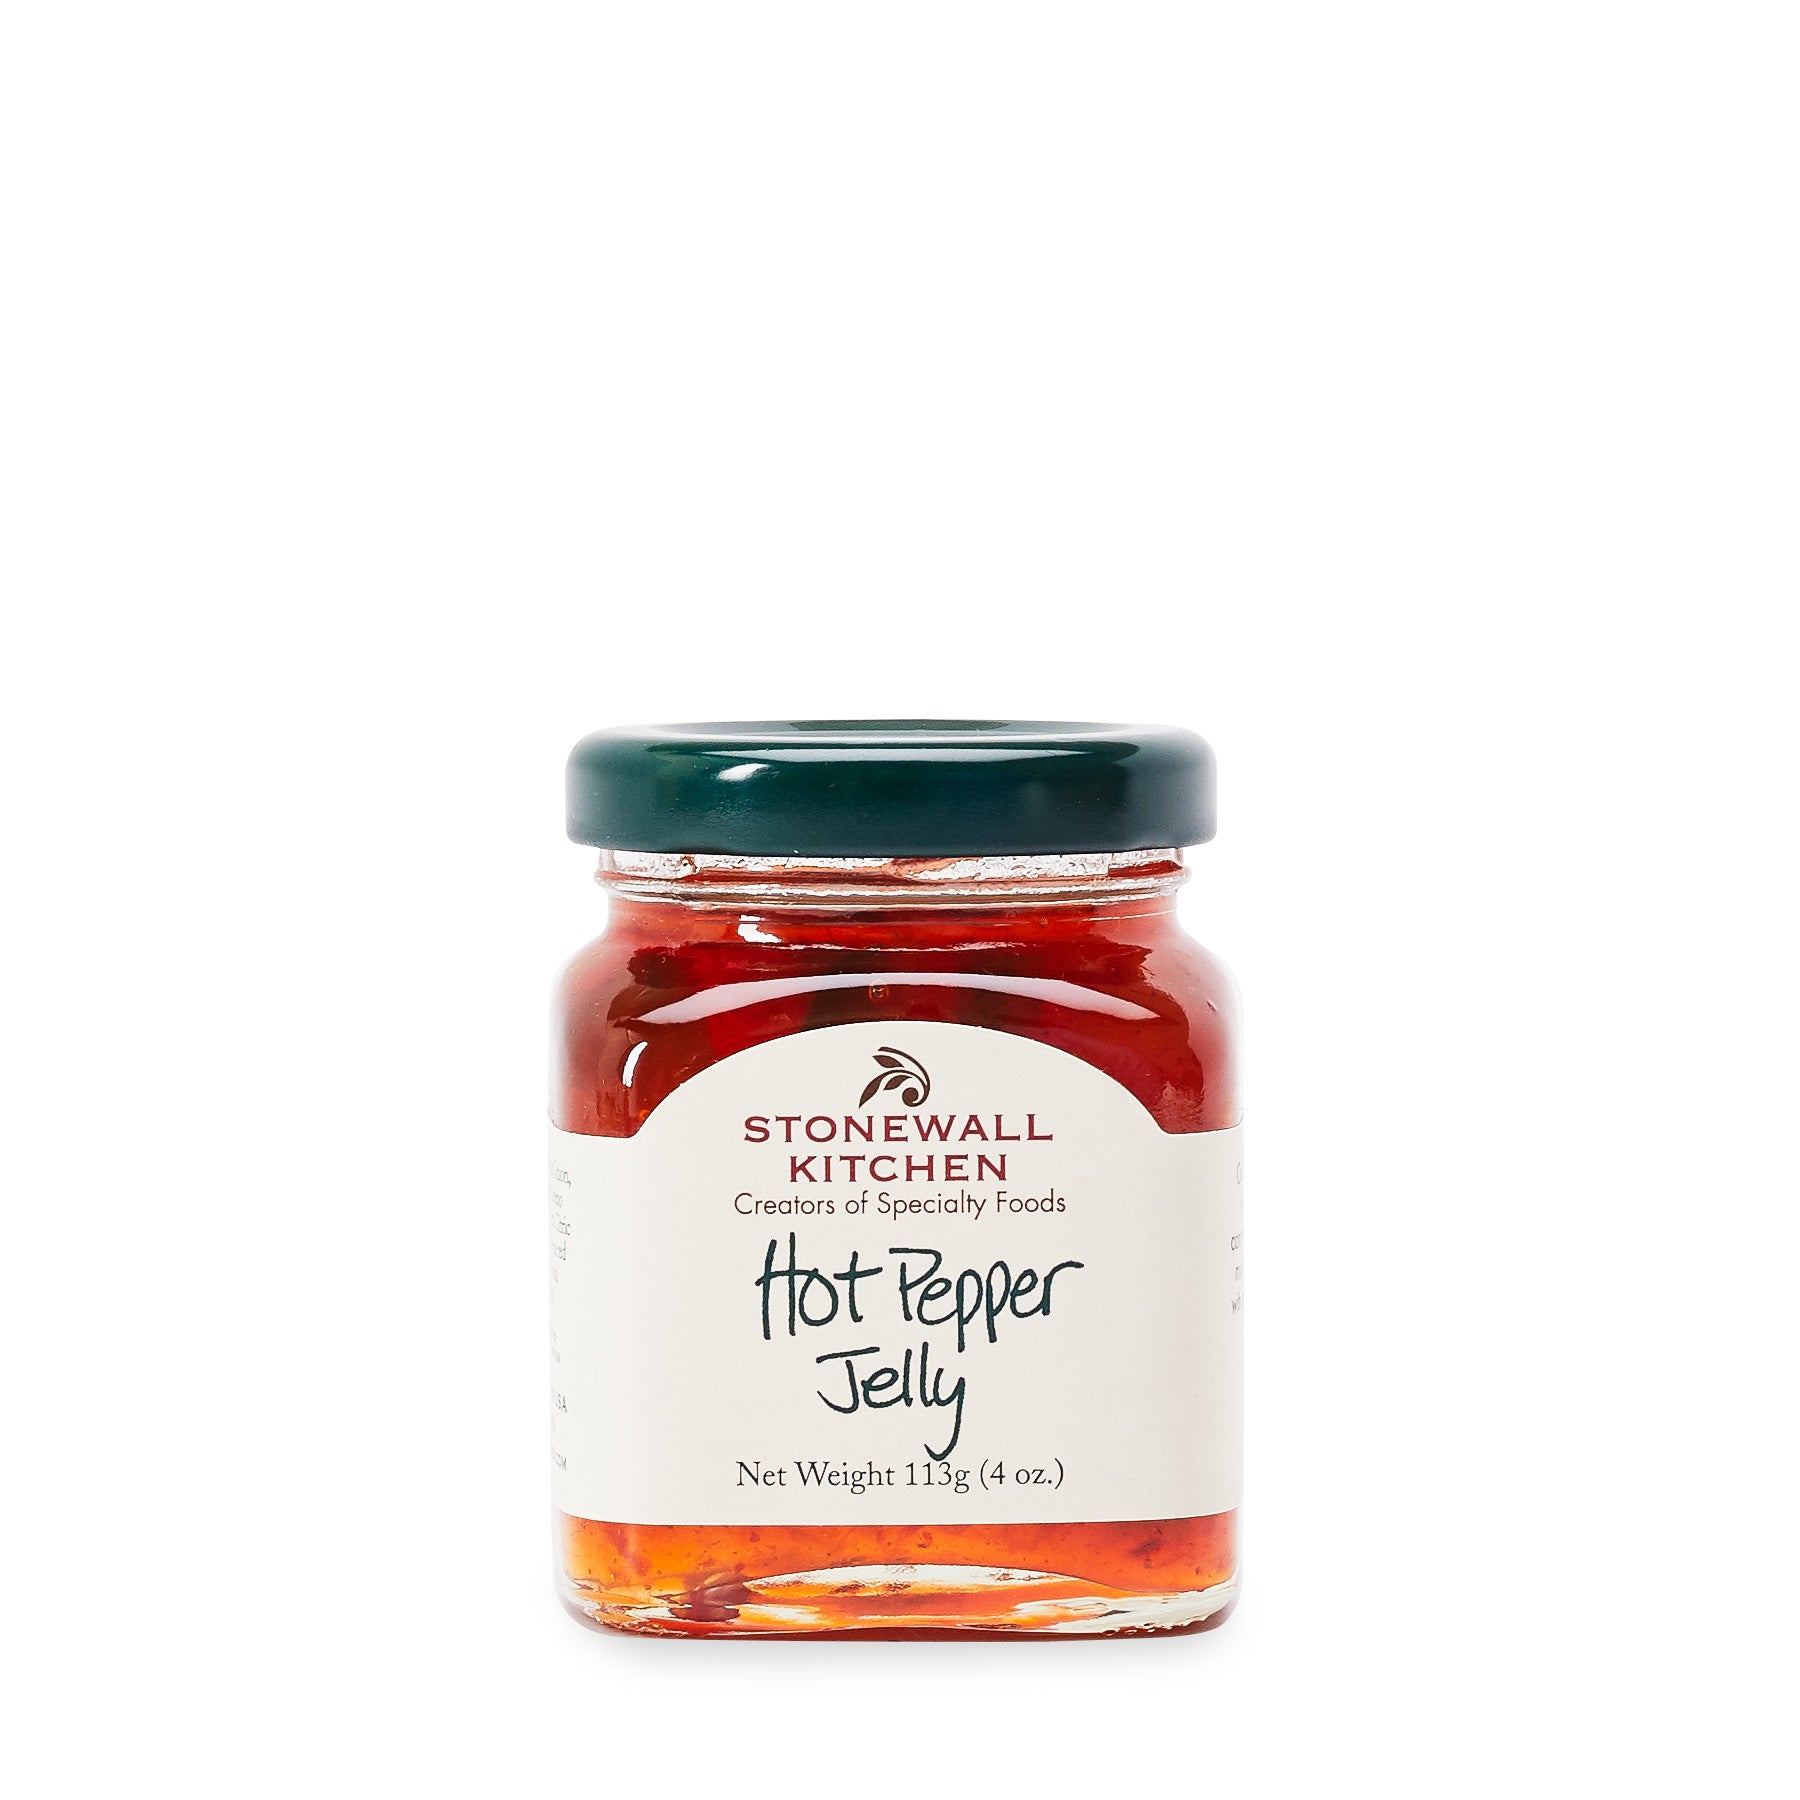 Stonewall Kitchen Mini Hot Pepper Jelly - Olive Oil Etcetera 